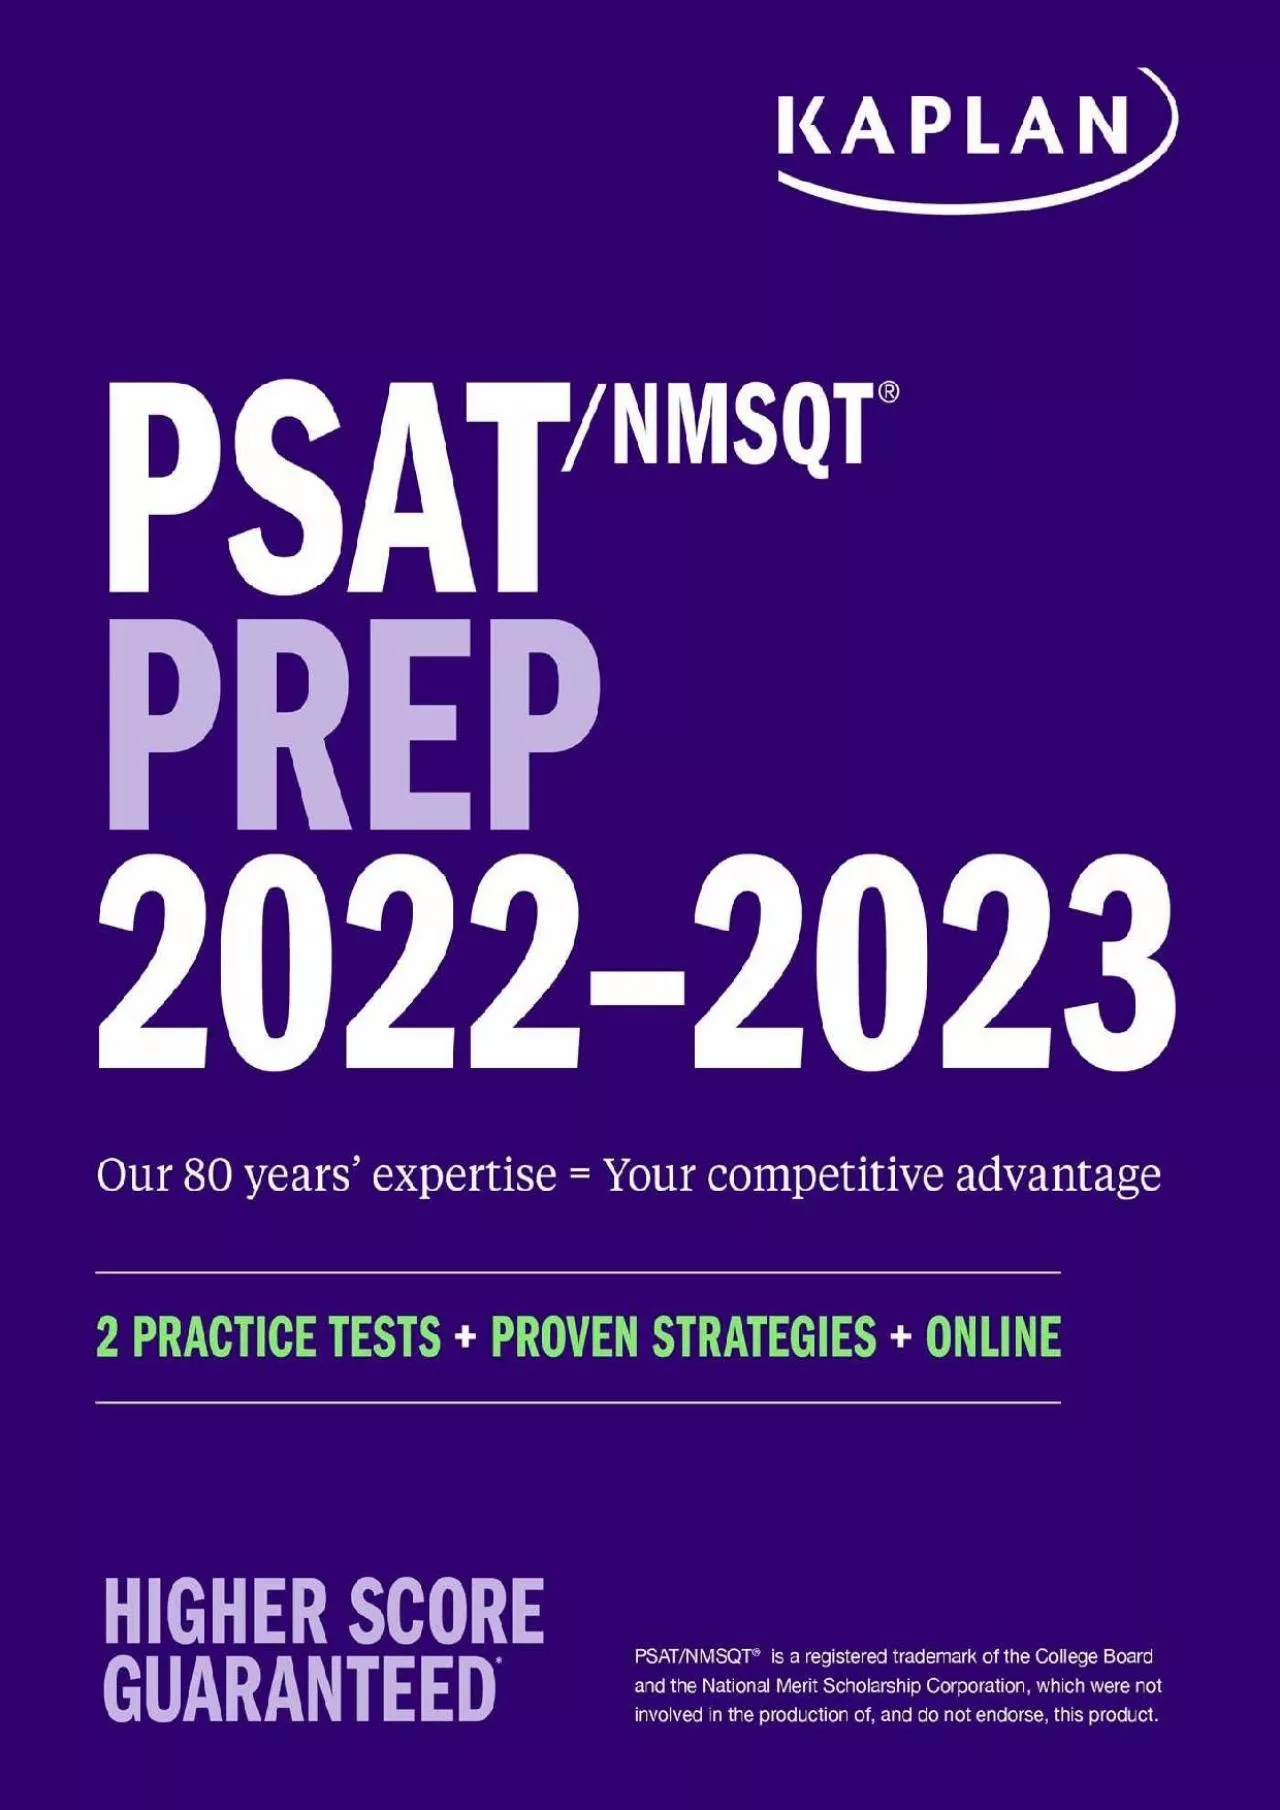 [EBOOK] PSAT/NMSQT Prep 2022-2023 with 2 Full Length Practice Tests, 2000+ Practice Questions,